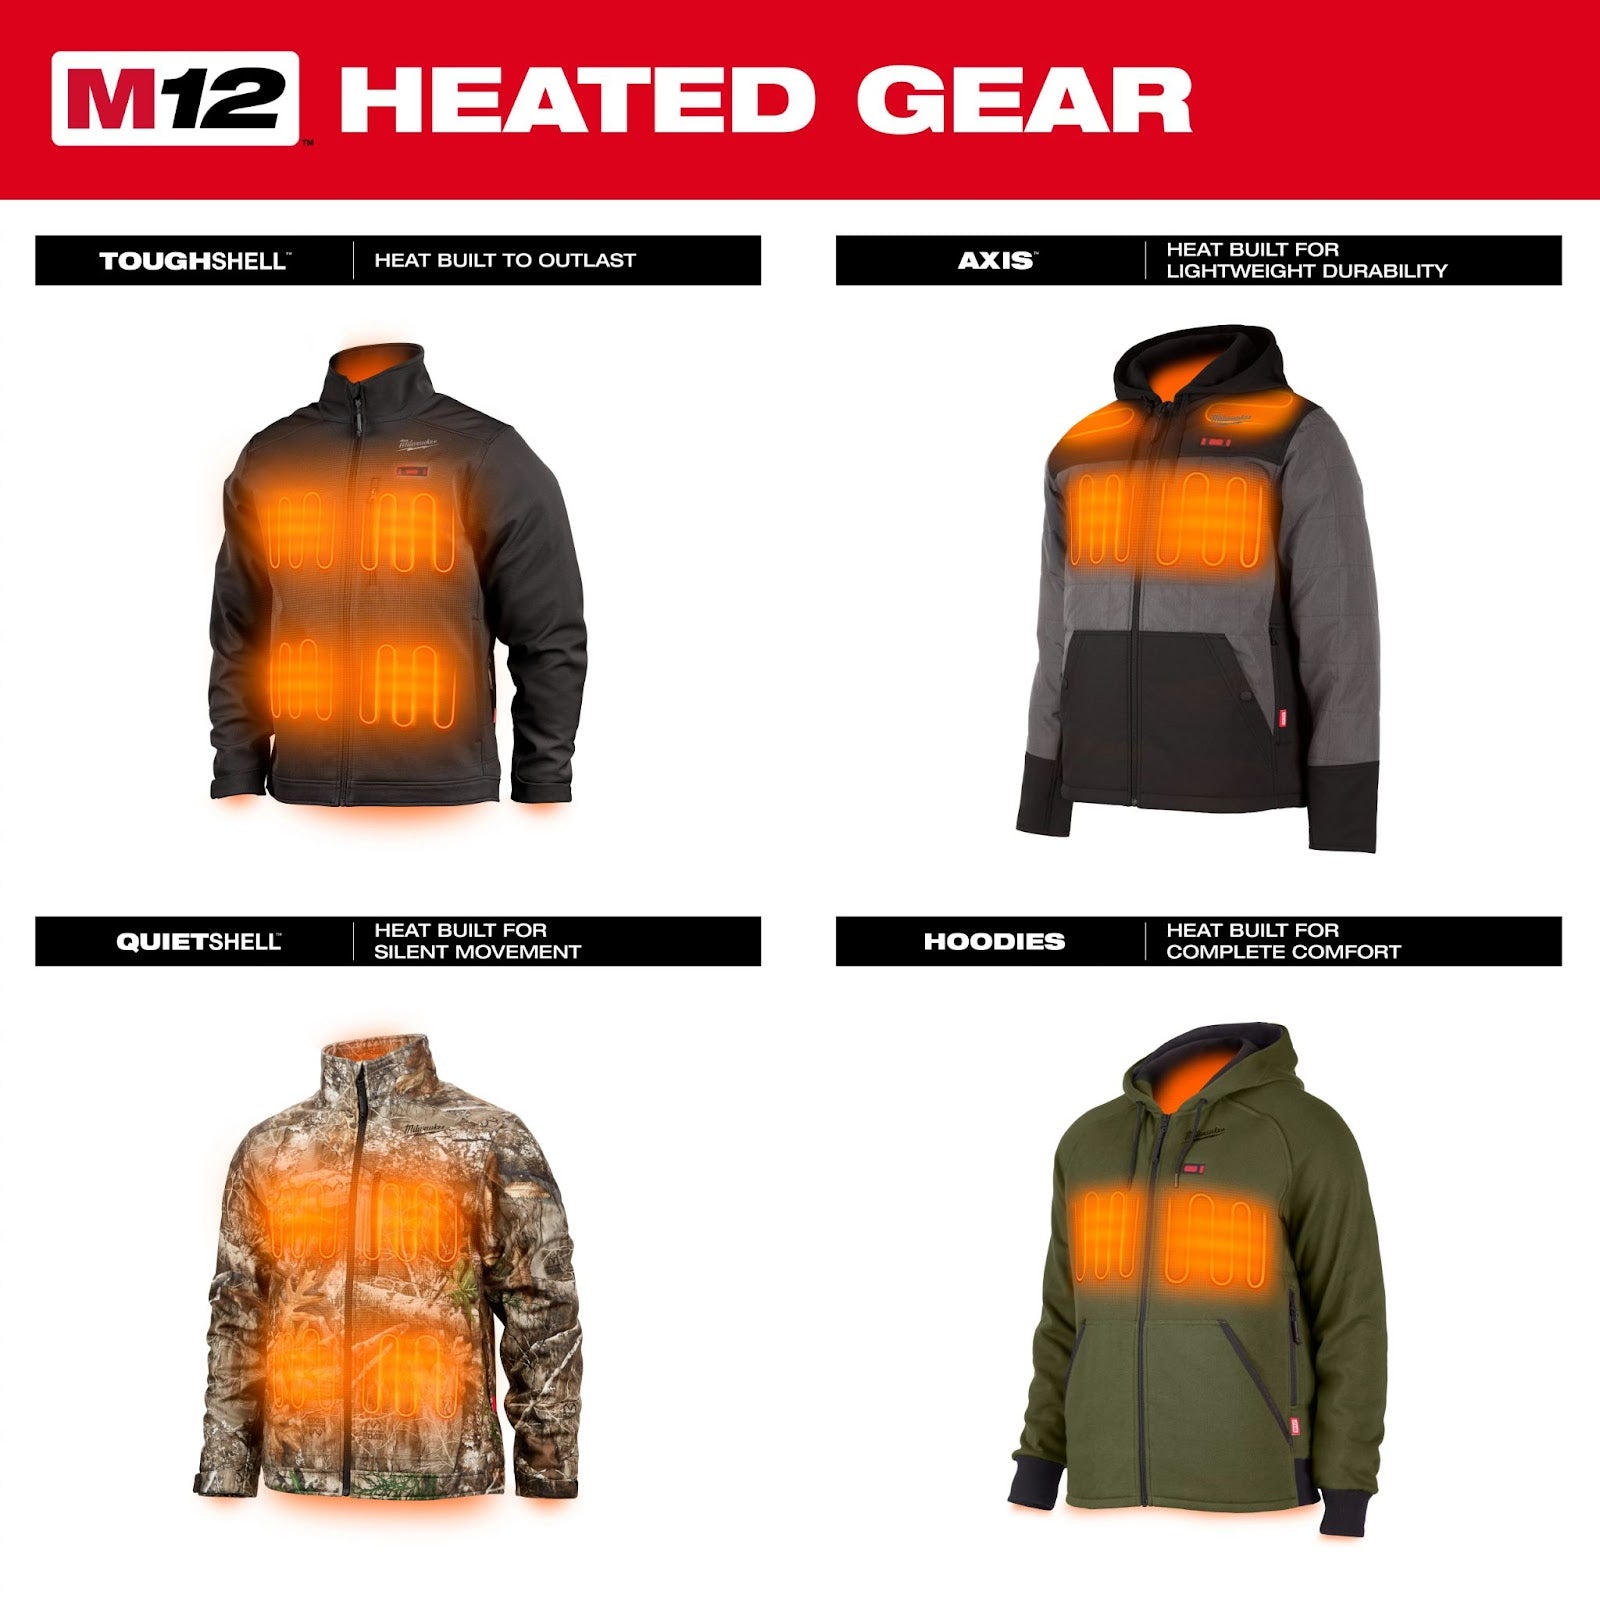 Image of heated gear heat zones and other technology